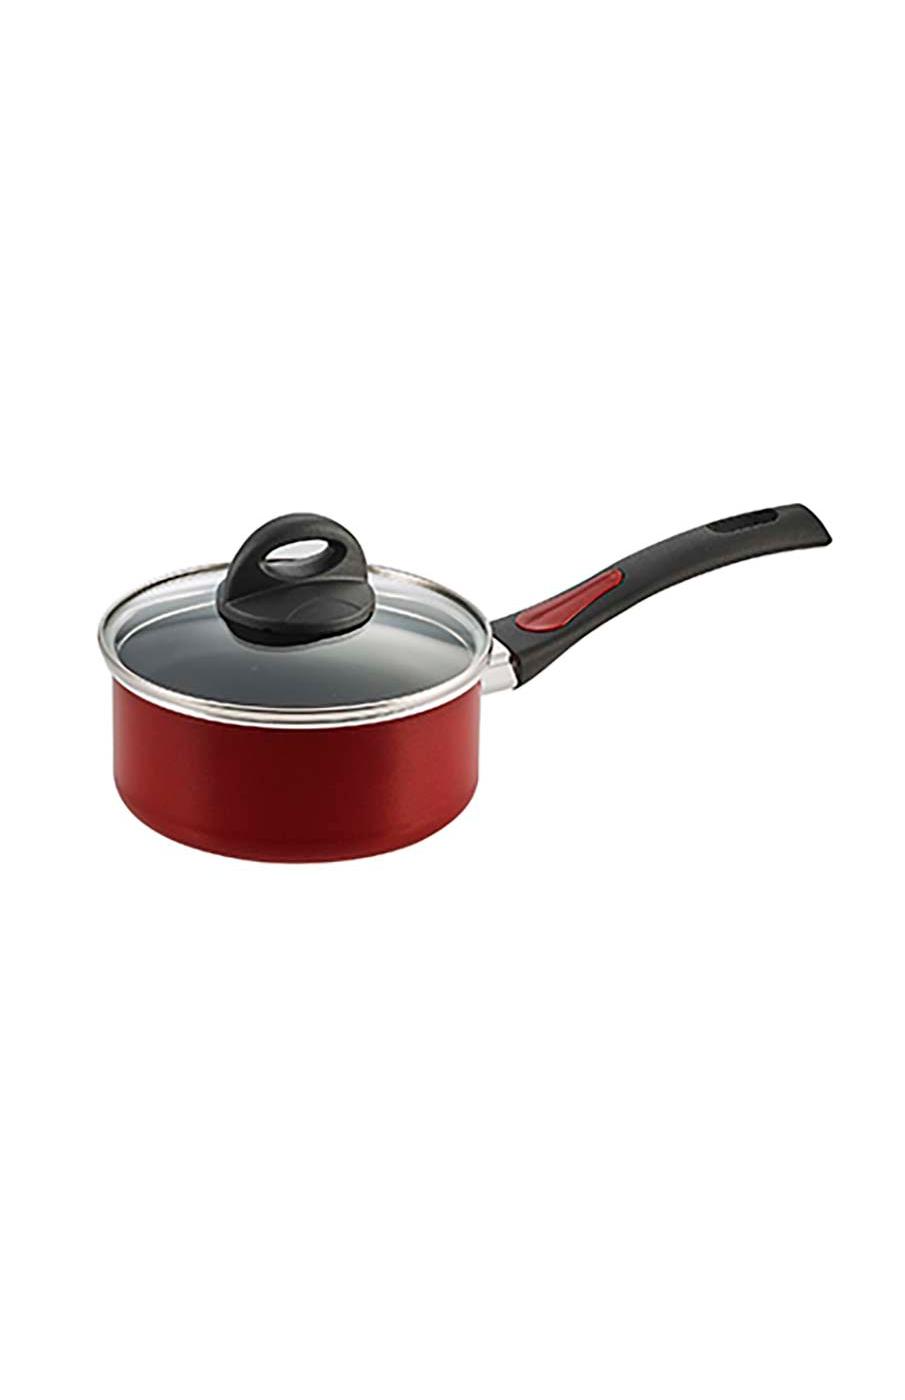 Tramontina Non-Stick Red Cookware Set; image 5 of 14